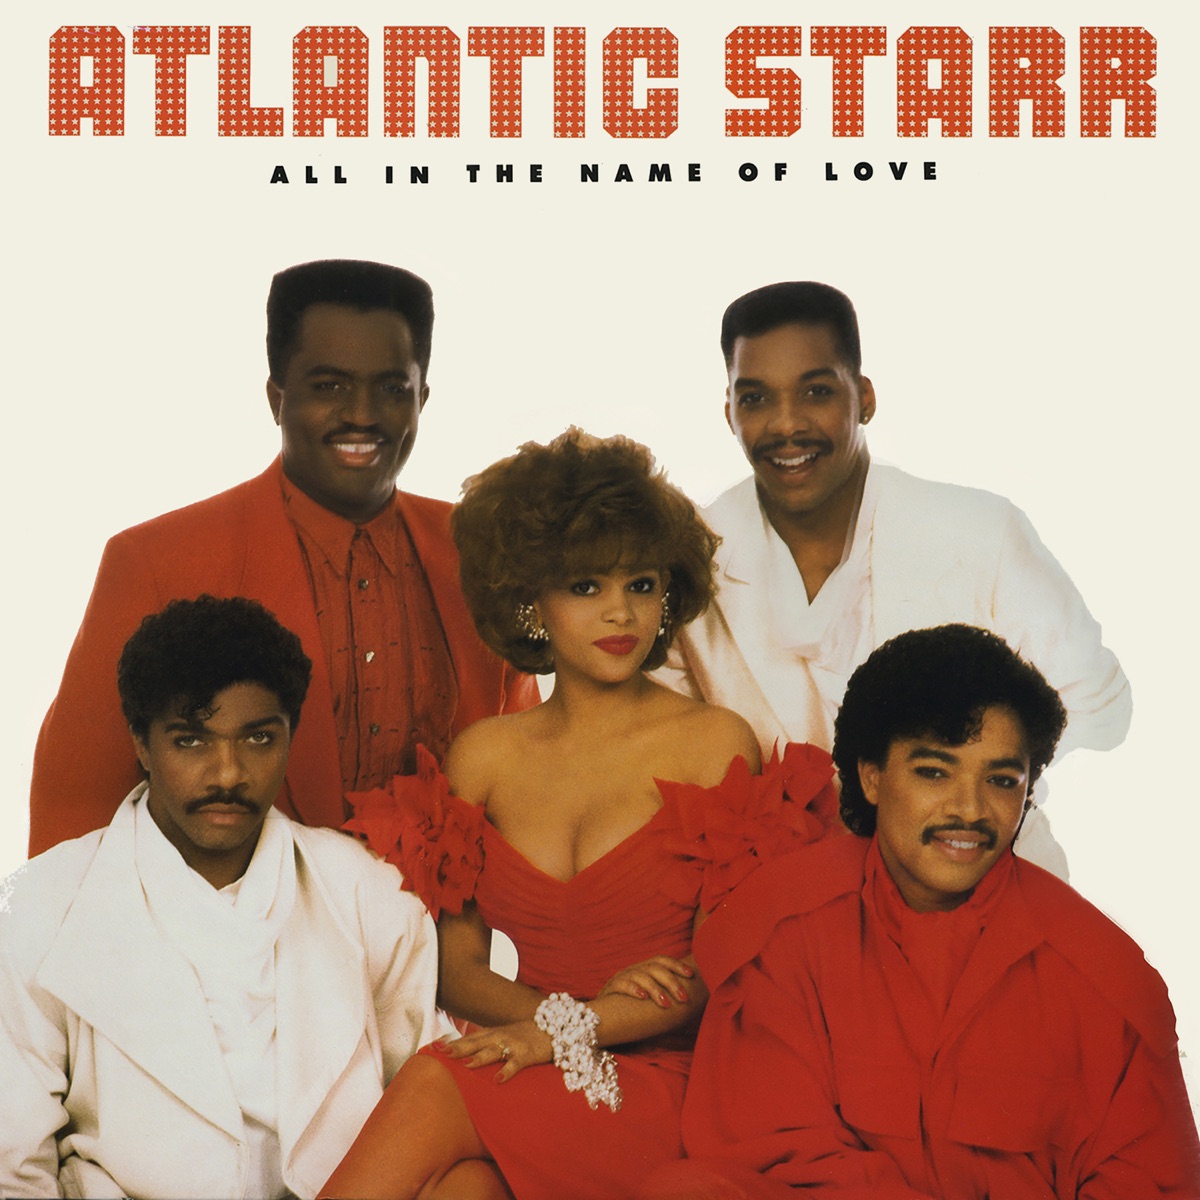 We're Movin' Up by Atlantic Starr on Apple Music